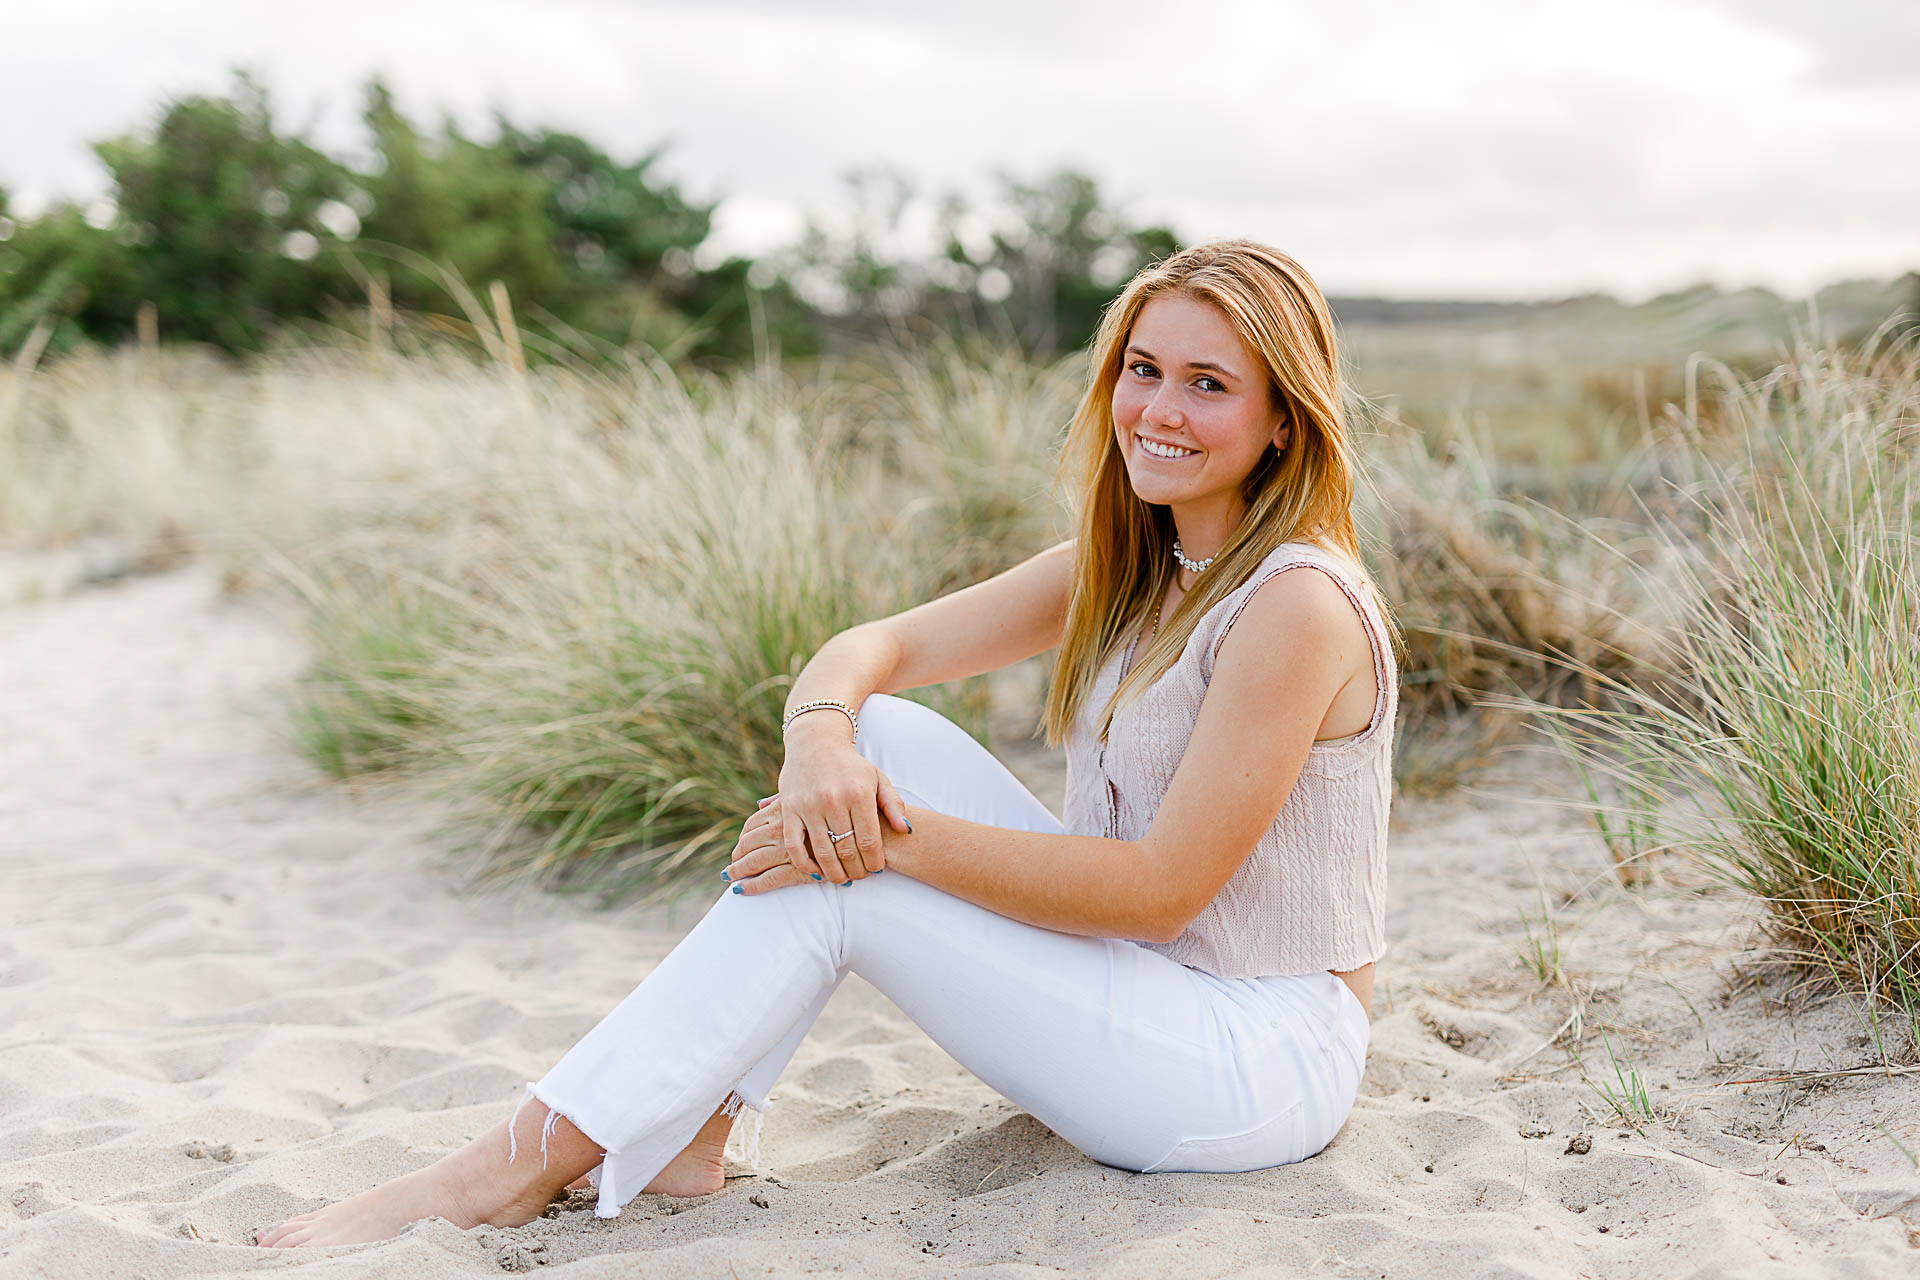 Photo from Caroline's Thayer Academy Senior Pictures by Christina Runnals Photography | High school senior girl sitting in front of beach grass